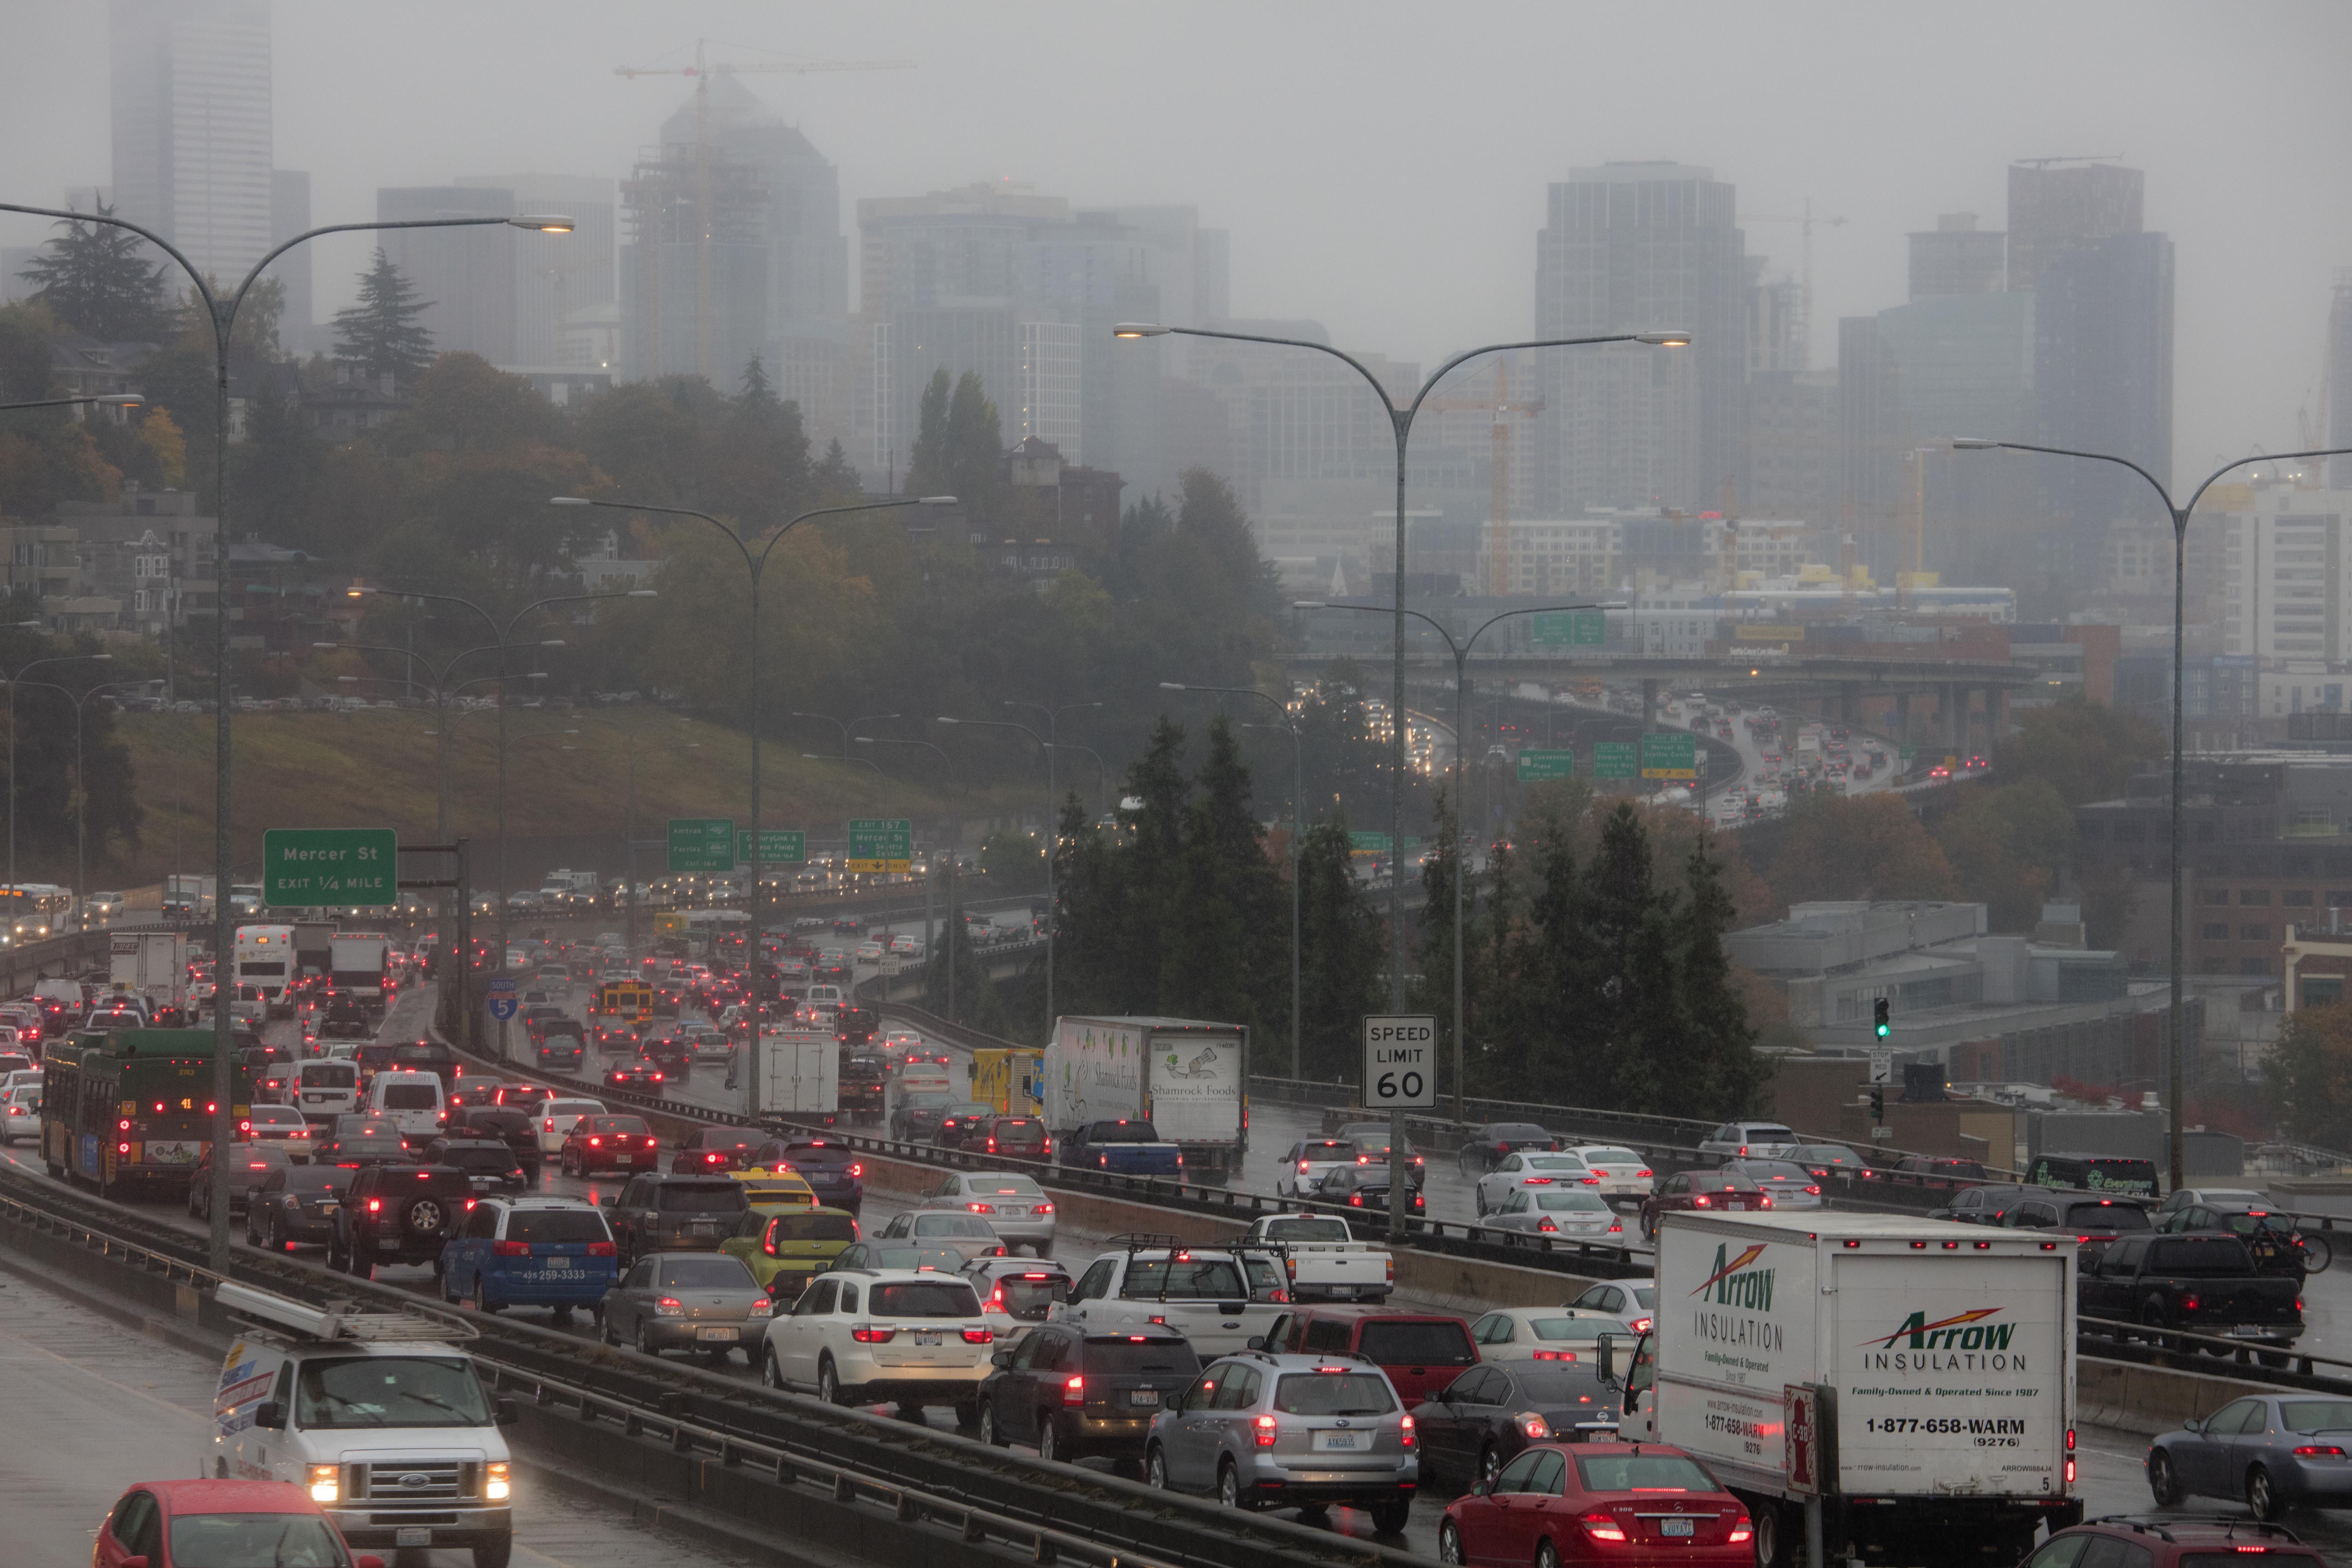 Traffic moves slowly, as drivers worked their way through the morning rainstorm, Thursday, Oct. 13, 2016 in Seattle. The moderate-to-heavy rains Thursday kick off a stormy period - with a lull predicted Friday before the weather intensifies again Saturday.